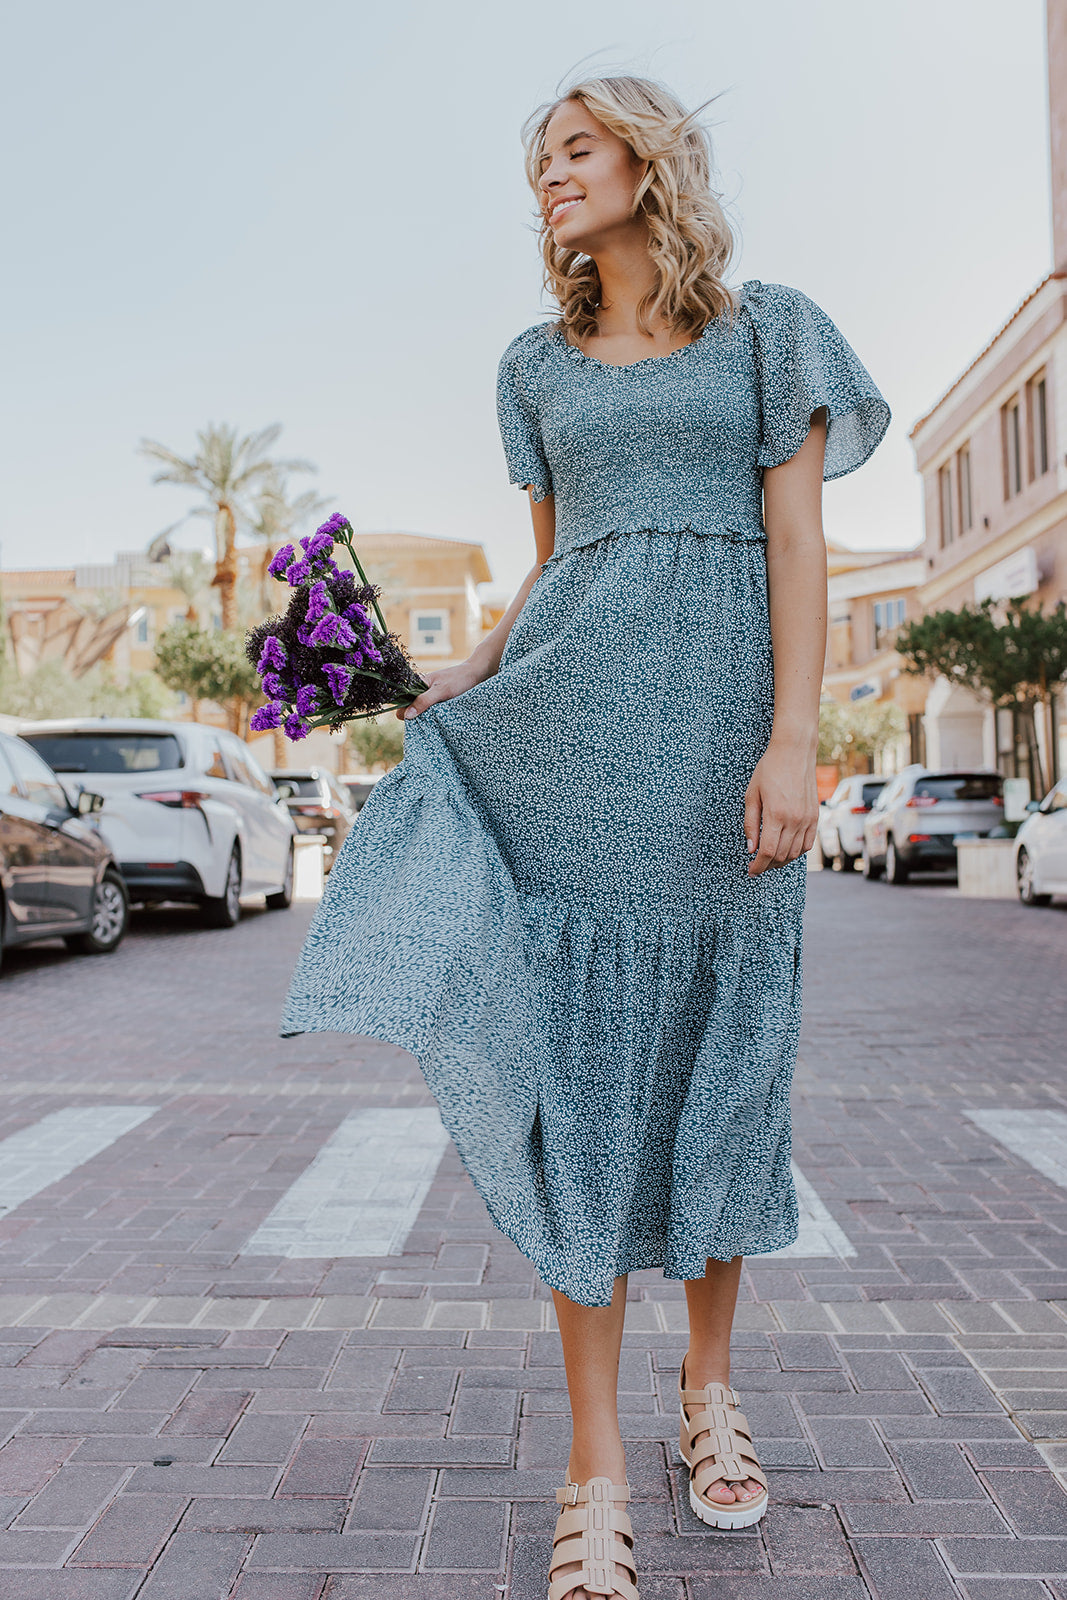 THE NOBODY BUT YOU MIDI DRESS IN TEAL